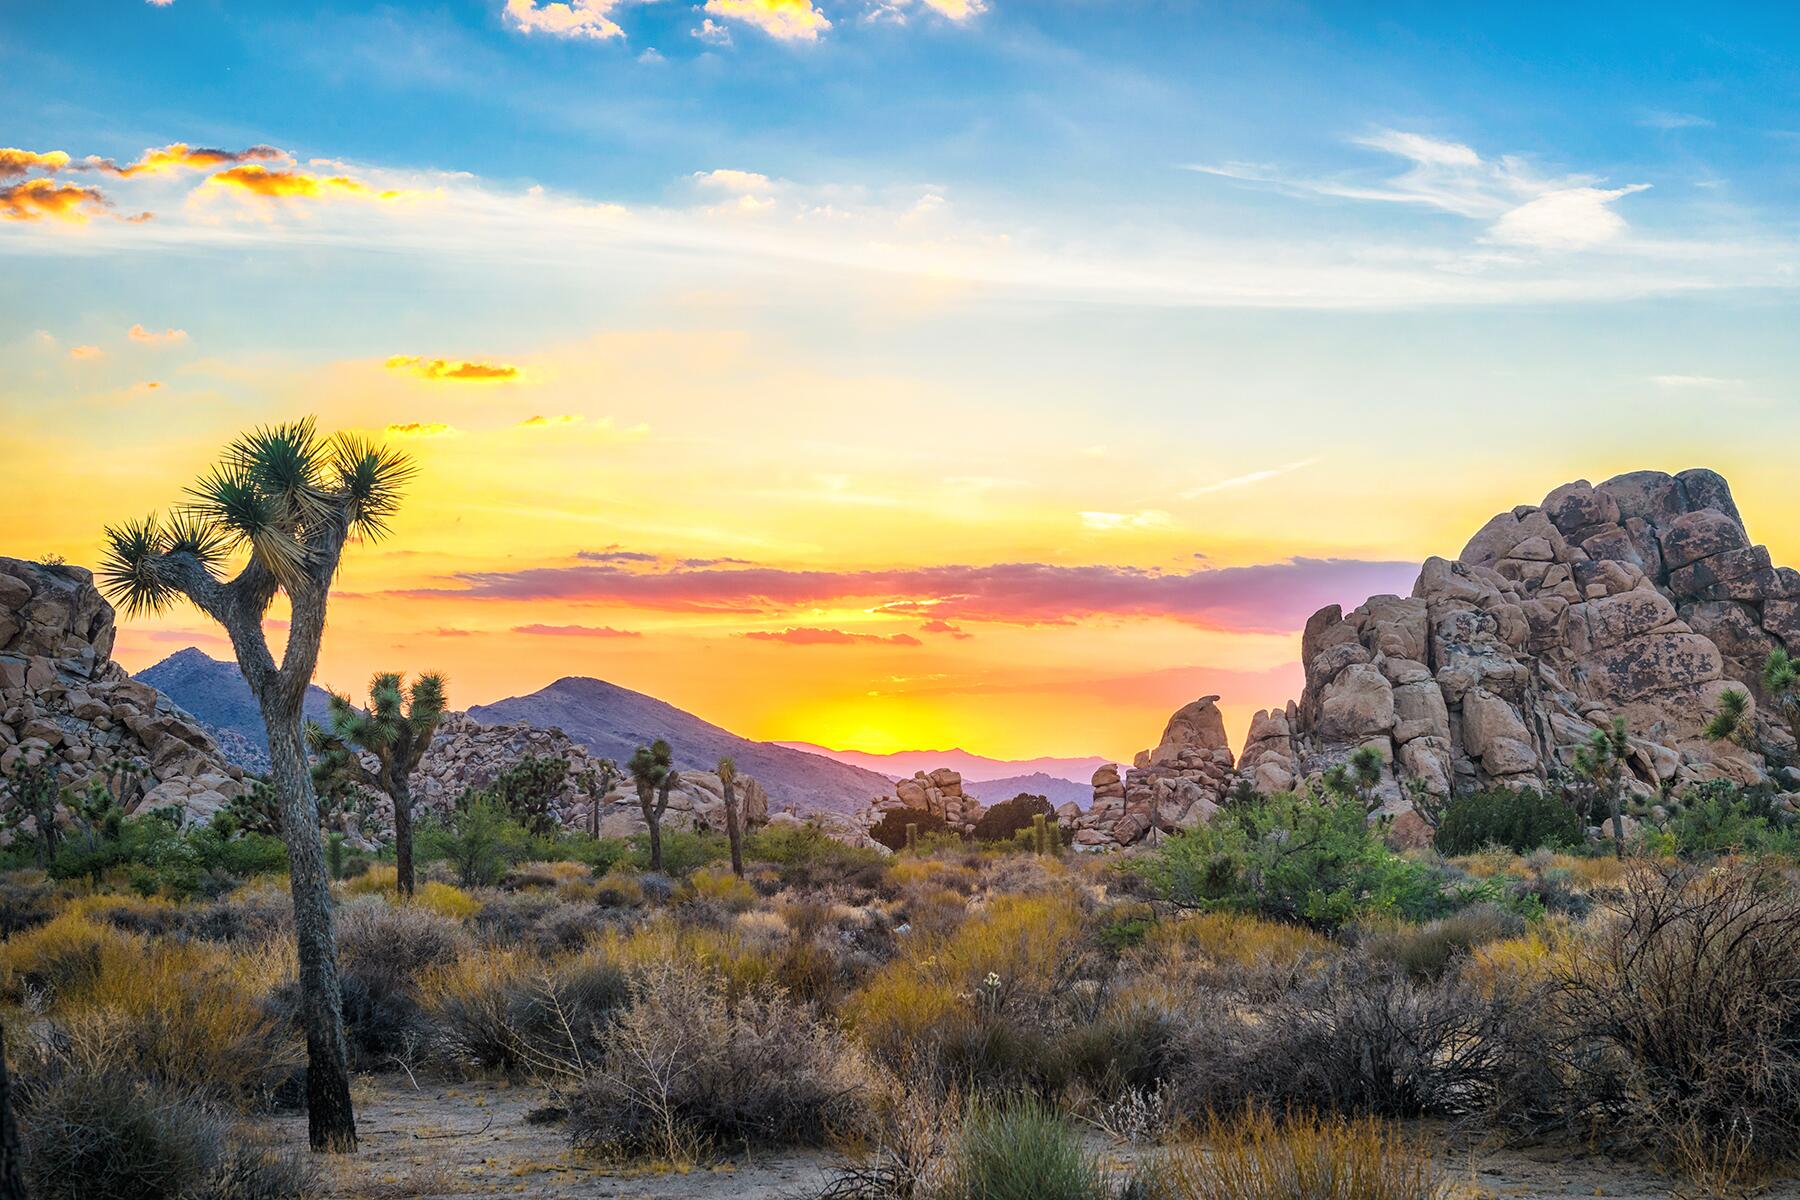 <a href='https://www.fodors.com/world/north-america/usa/california/experiences/news/photos/the-best-fall-day-trips-to-take-from-los-angeles#'>From &quot;12 Easy Fall Day Trips to Take From Los Angeles: Joshua Tree&quot;</a>